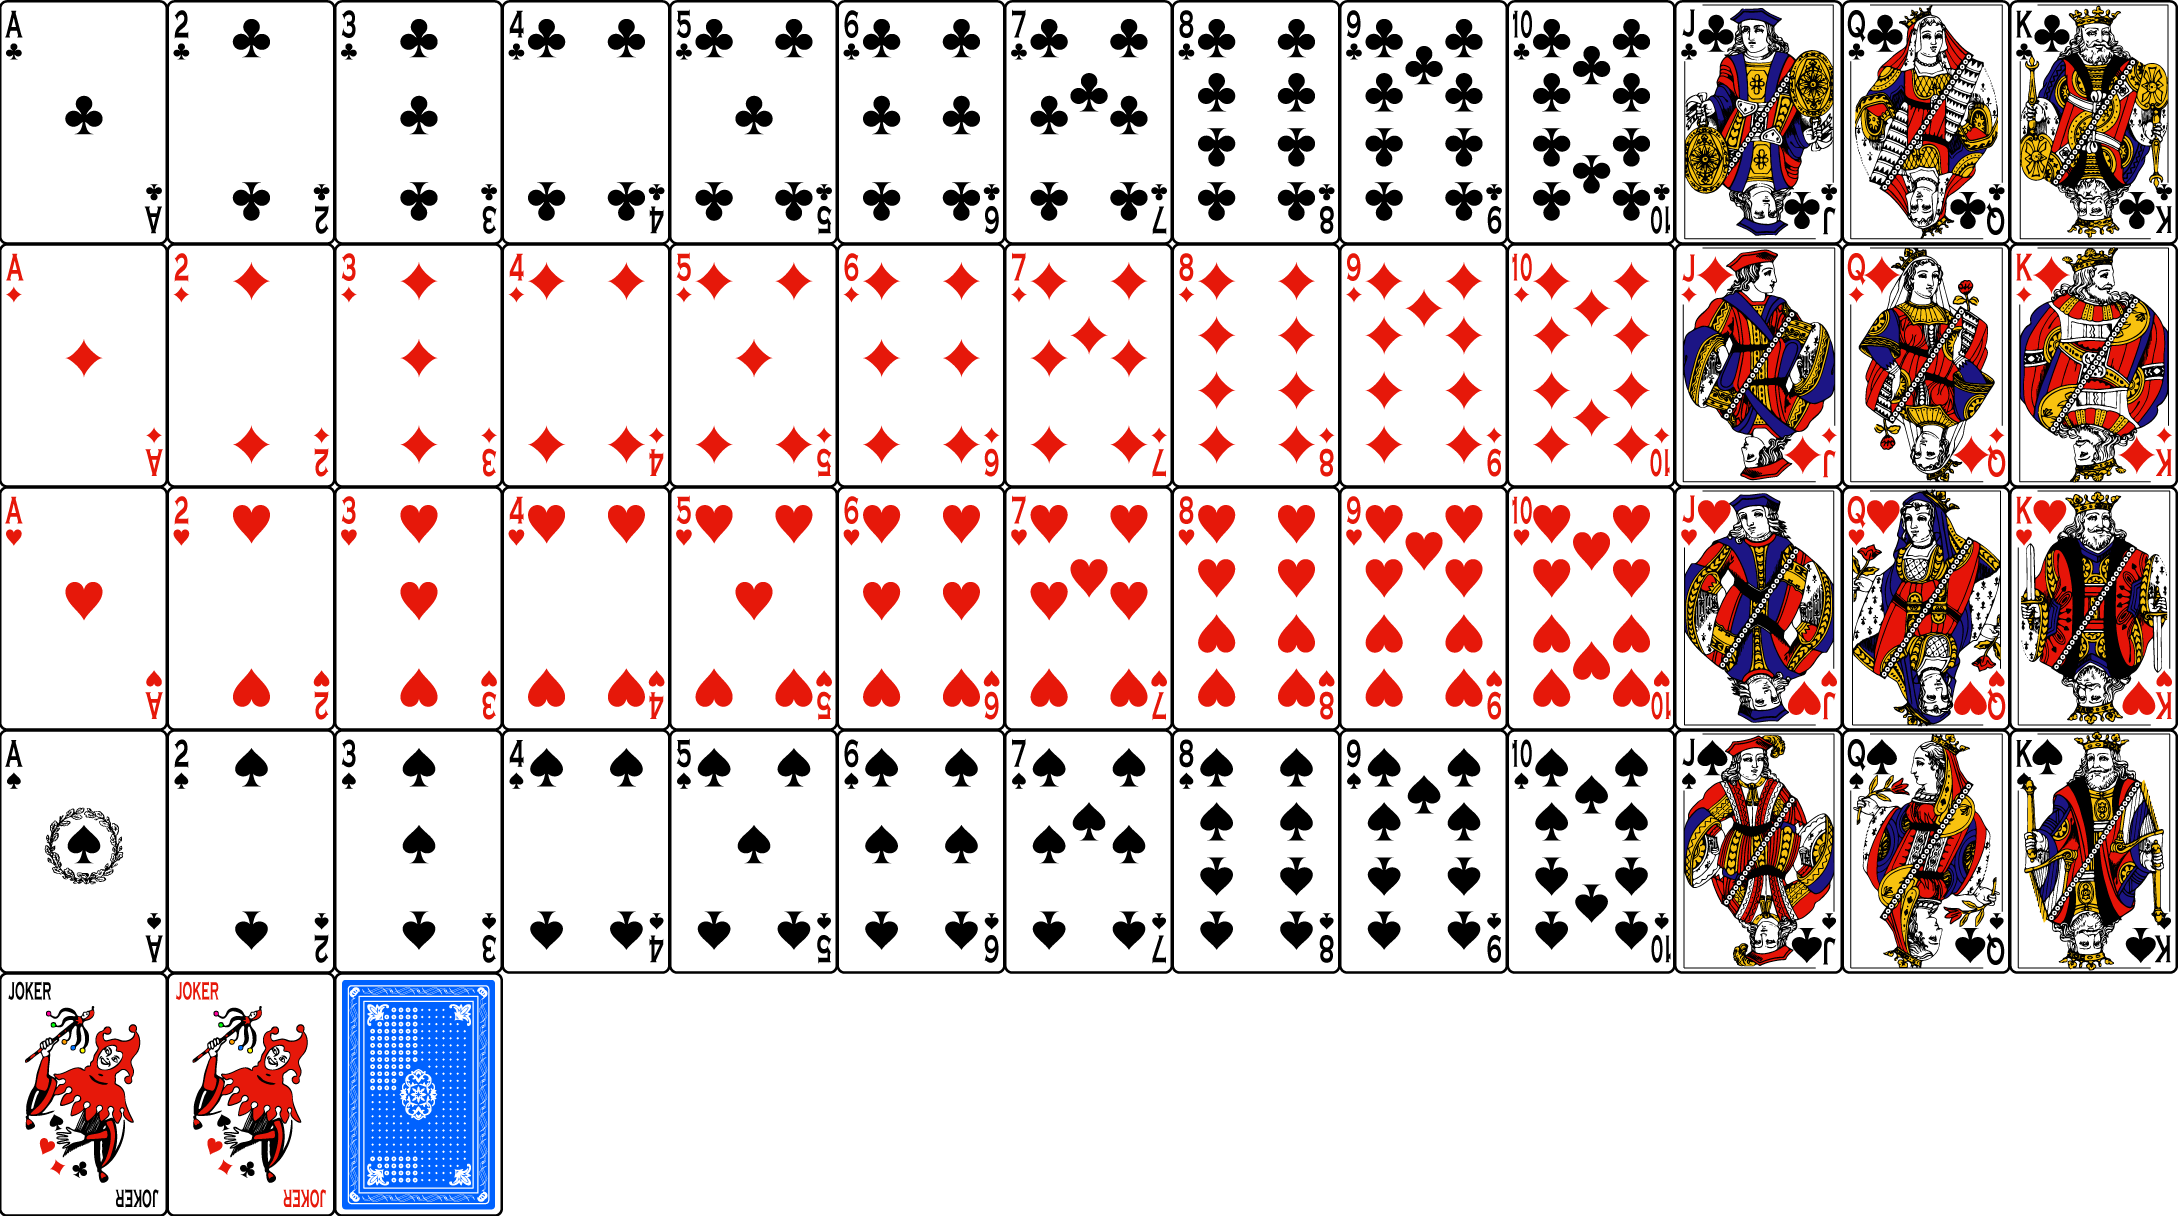 programming-practice-building-a-deck-of-playing-cards-in-ruby